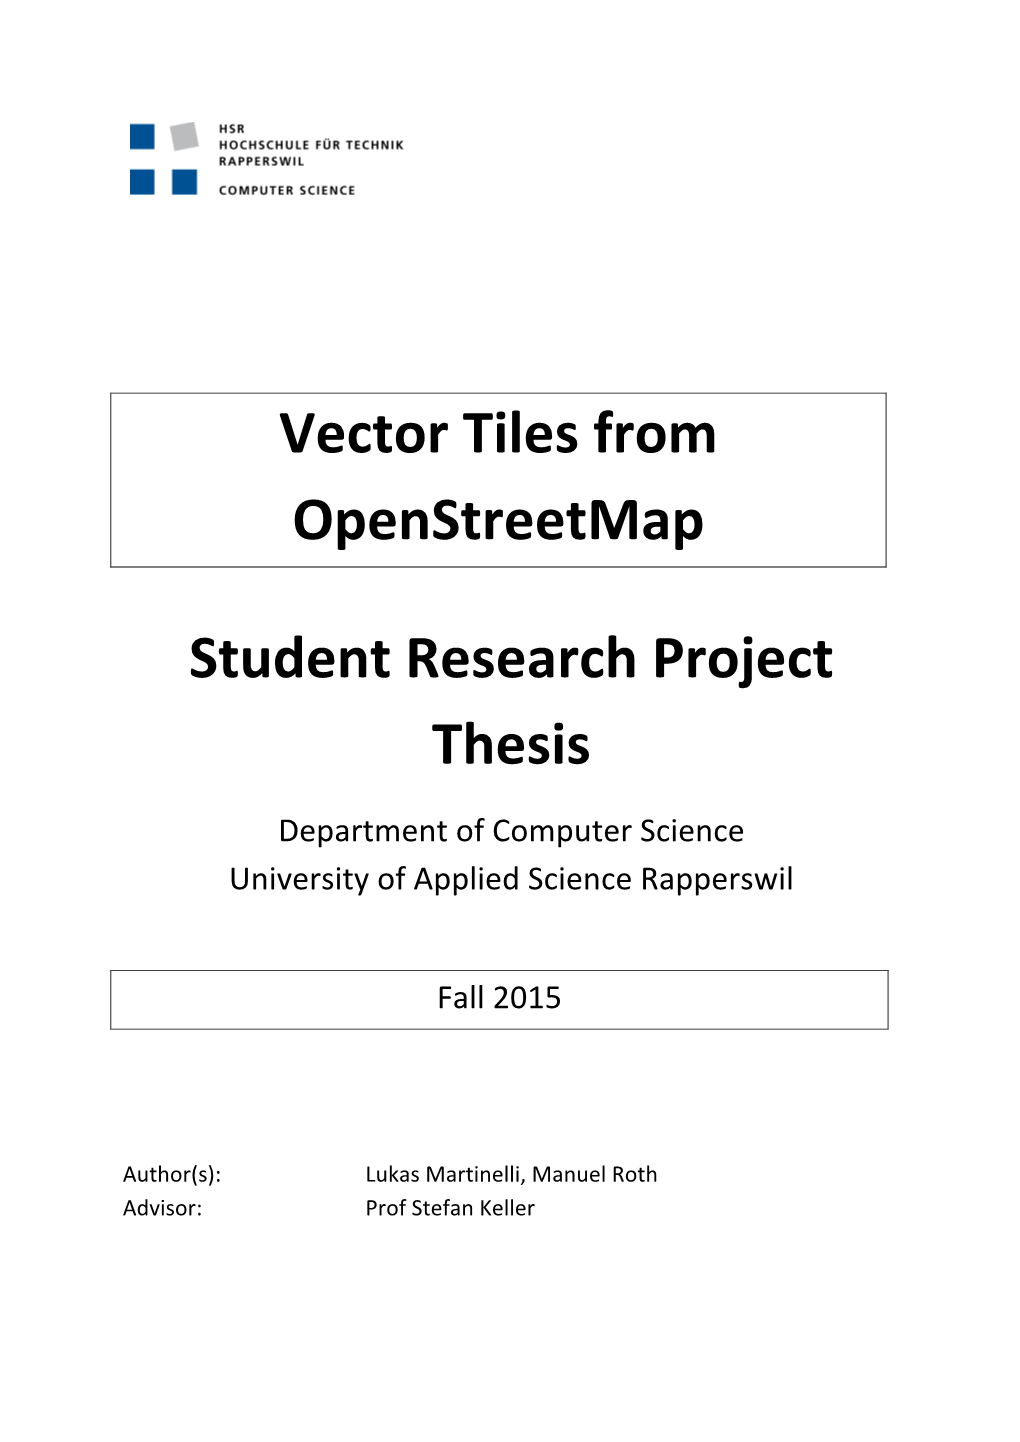 Vector Tiles from Openstreetmap Student Research Project Thesis